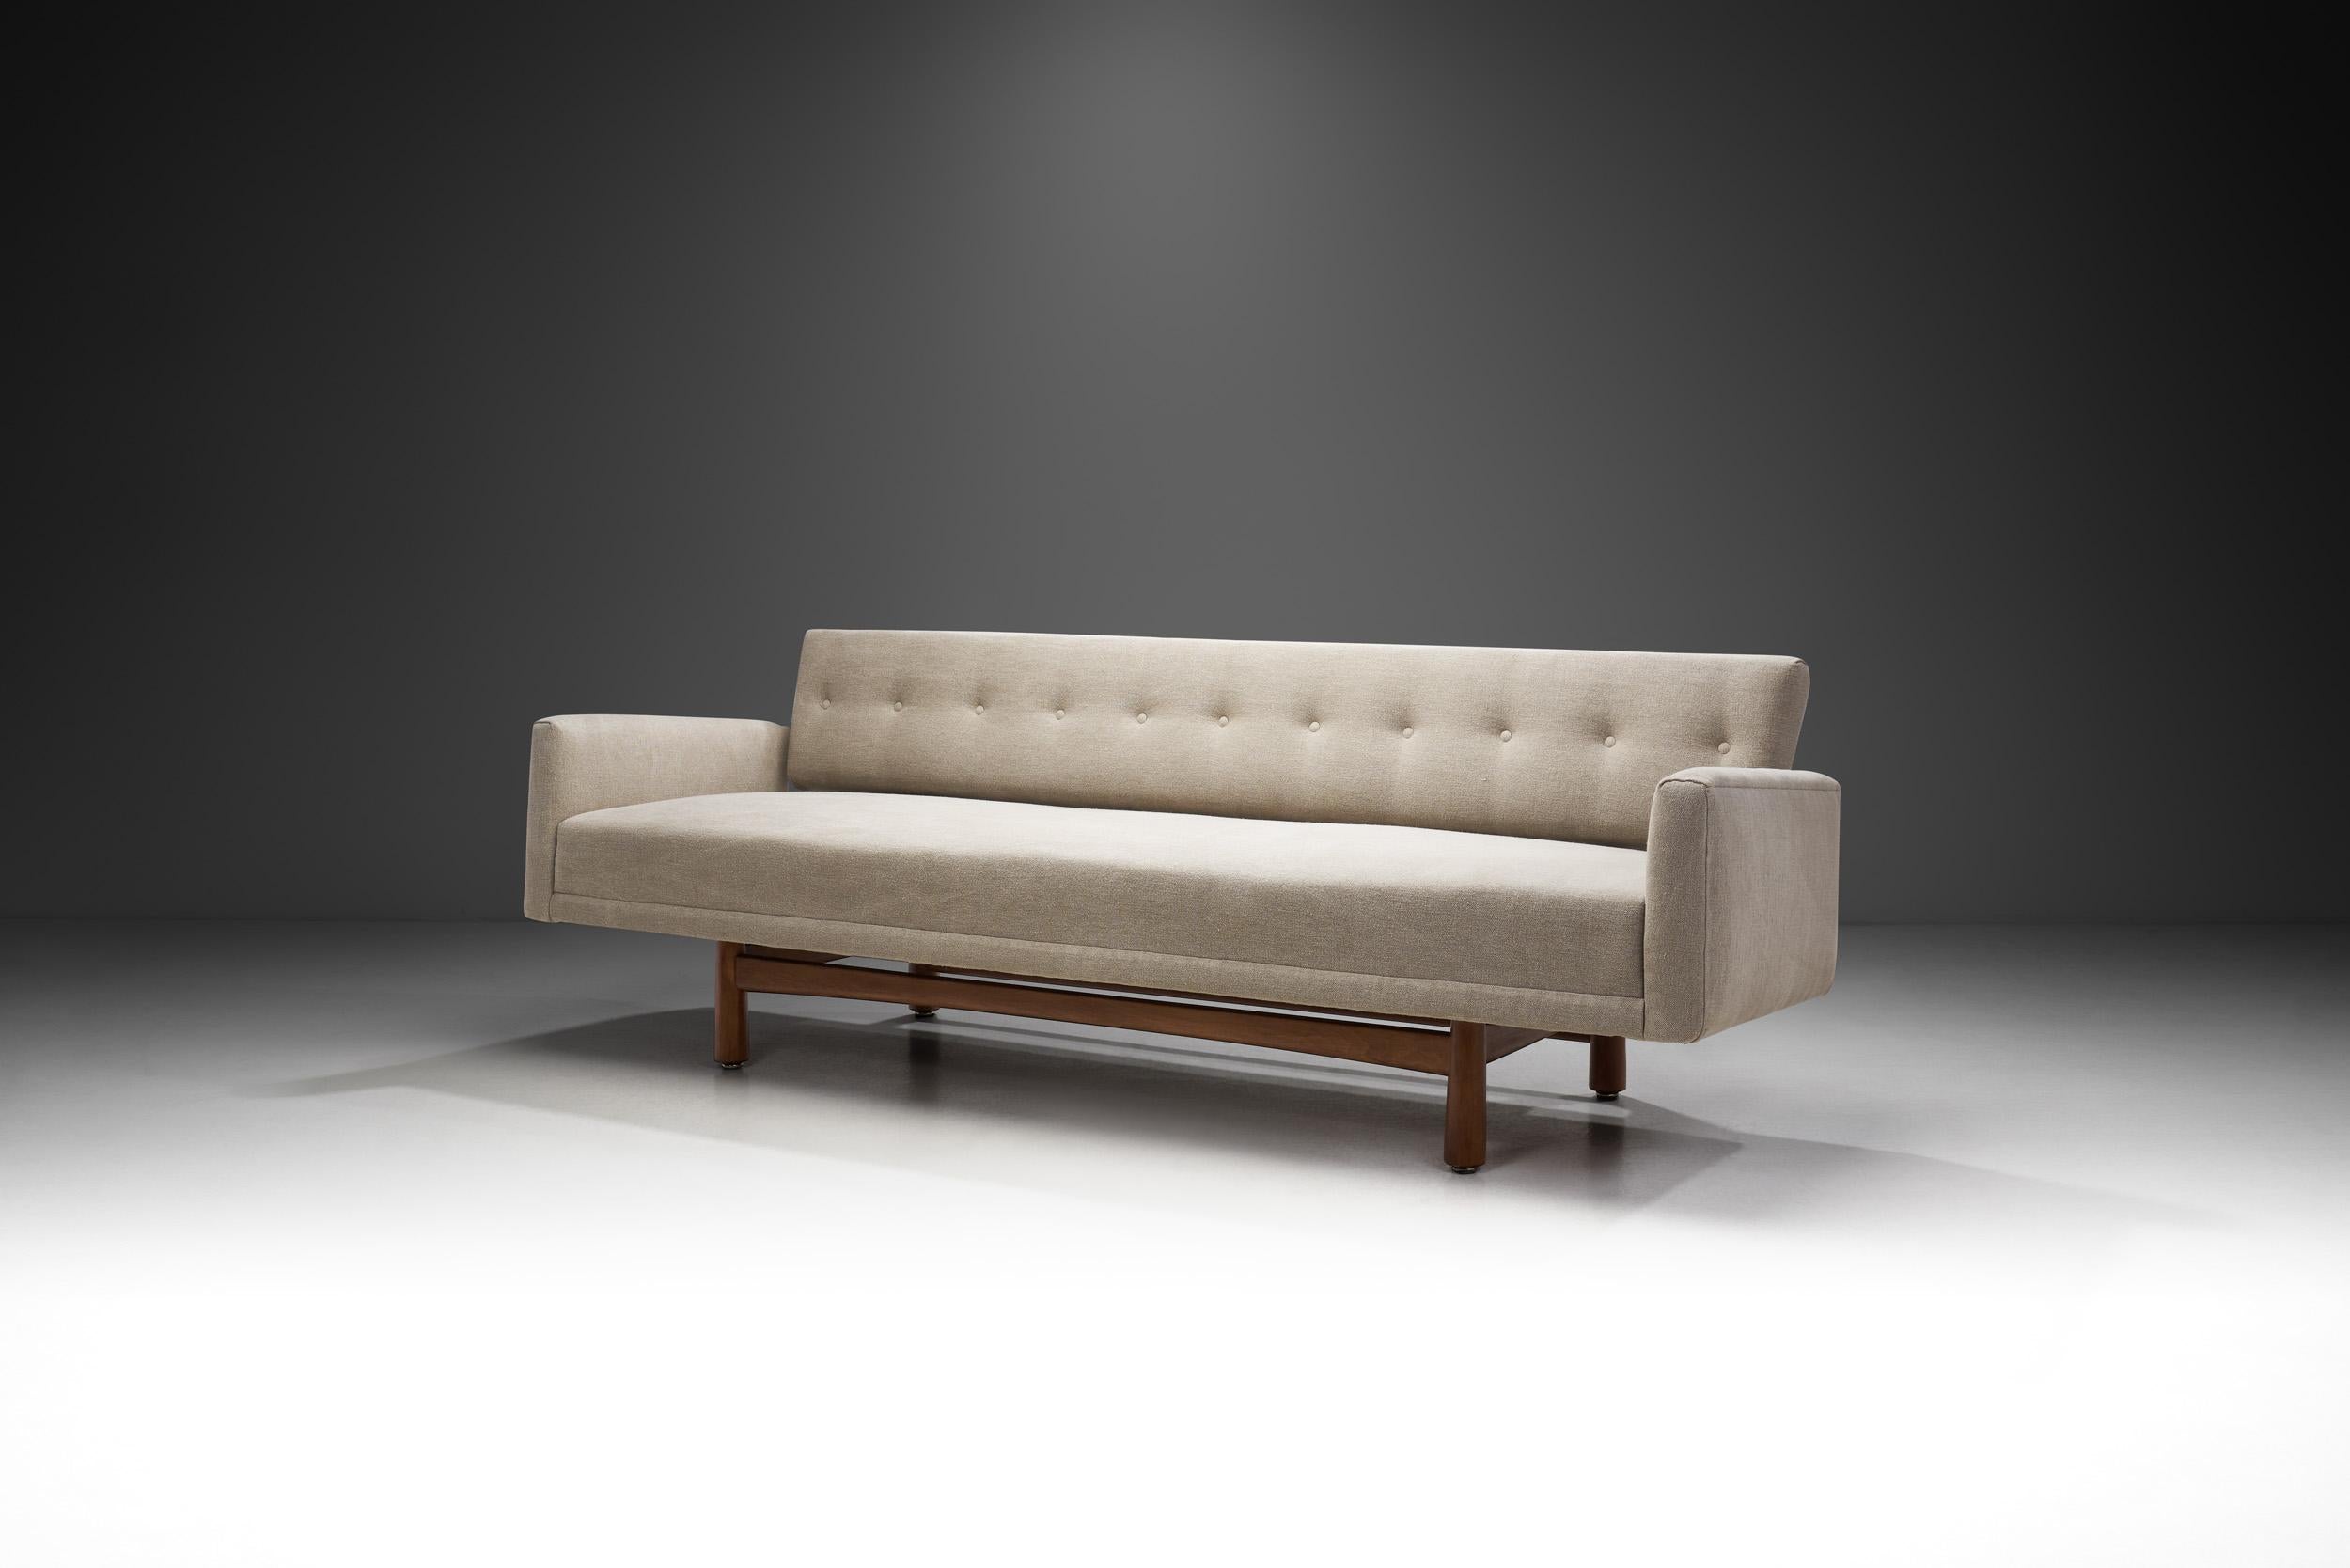 Edward Wormley took the best elements from classical, historical Scandinavian and other European furniture design and translated them into a Modern vernacular. The result was furniture like this exceptional “New York” sofa: sophisticated, stylish,